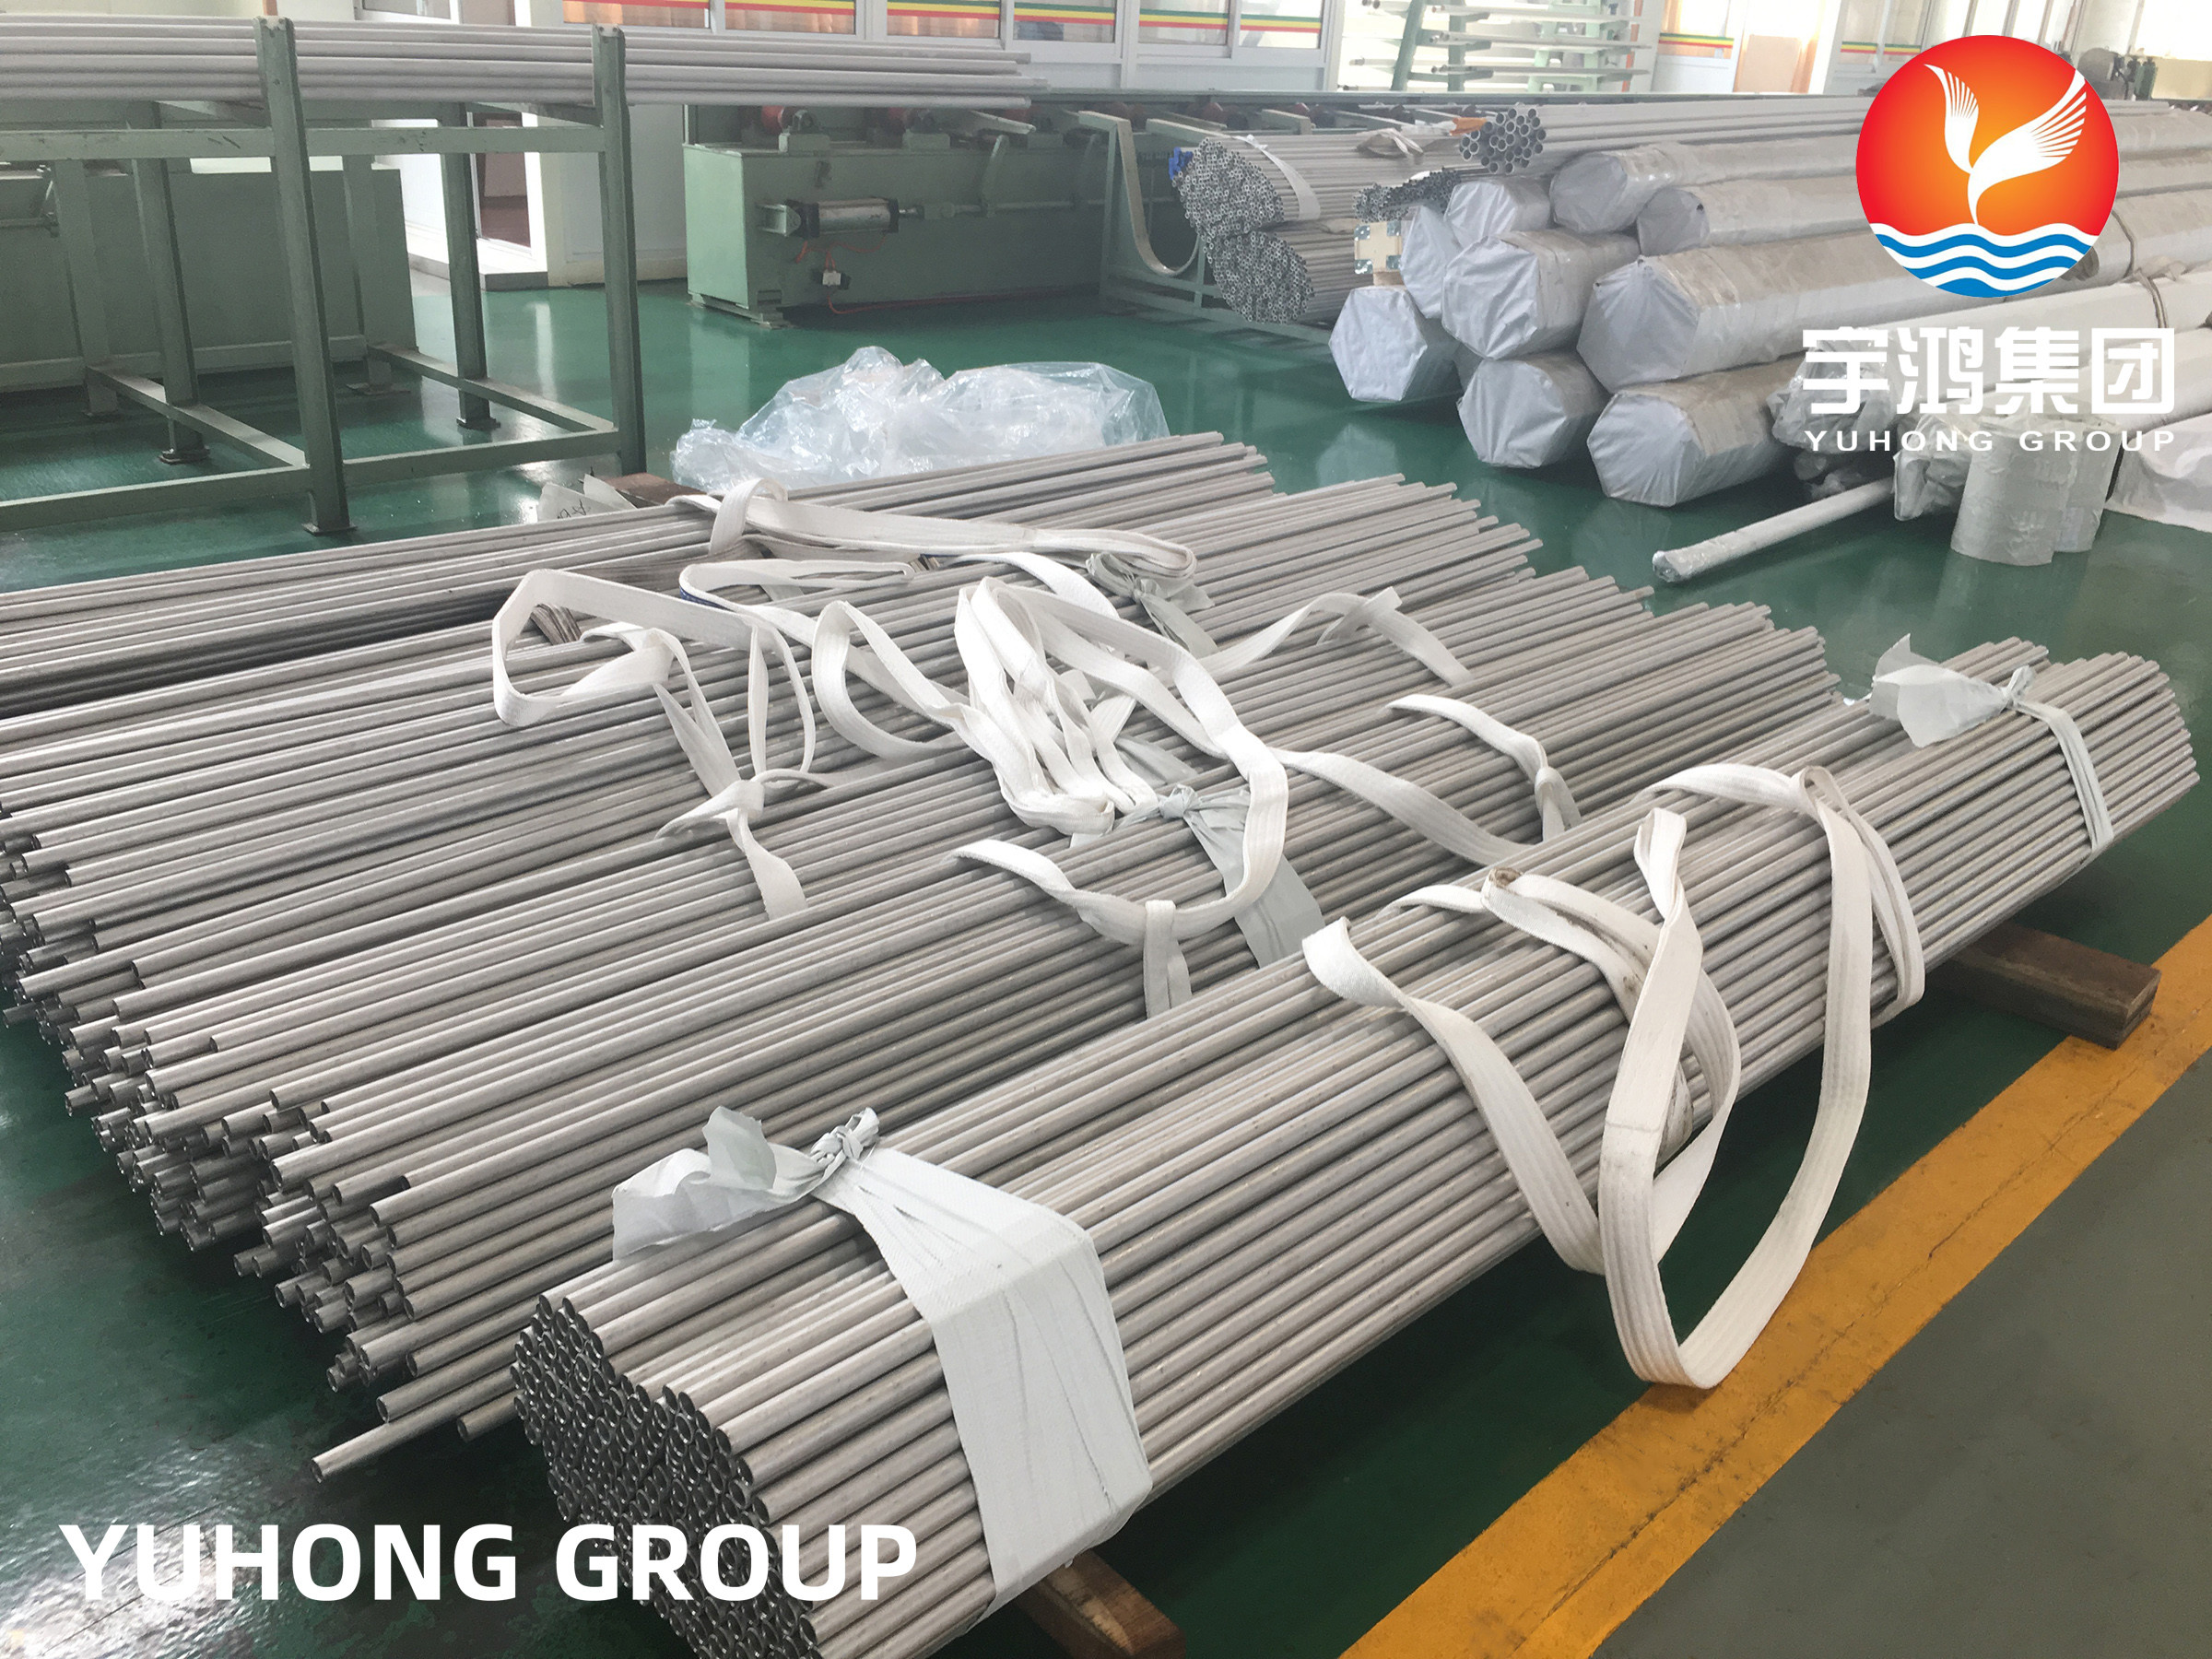 China ASTM A213 / ASME SA213 TP310S / 1.4845 / S31008 SEAMLESS TUBE FOR HEAT EXCHANGER wholesale